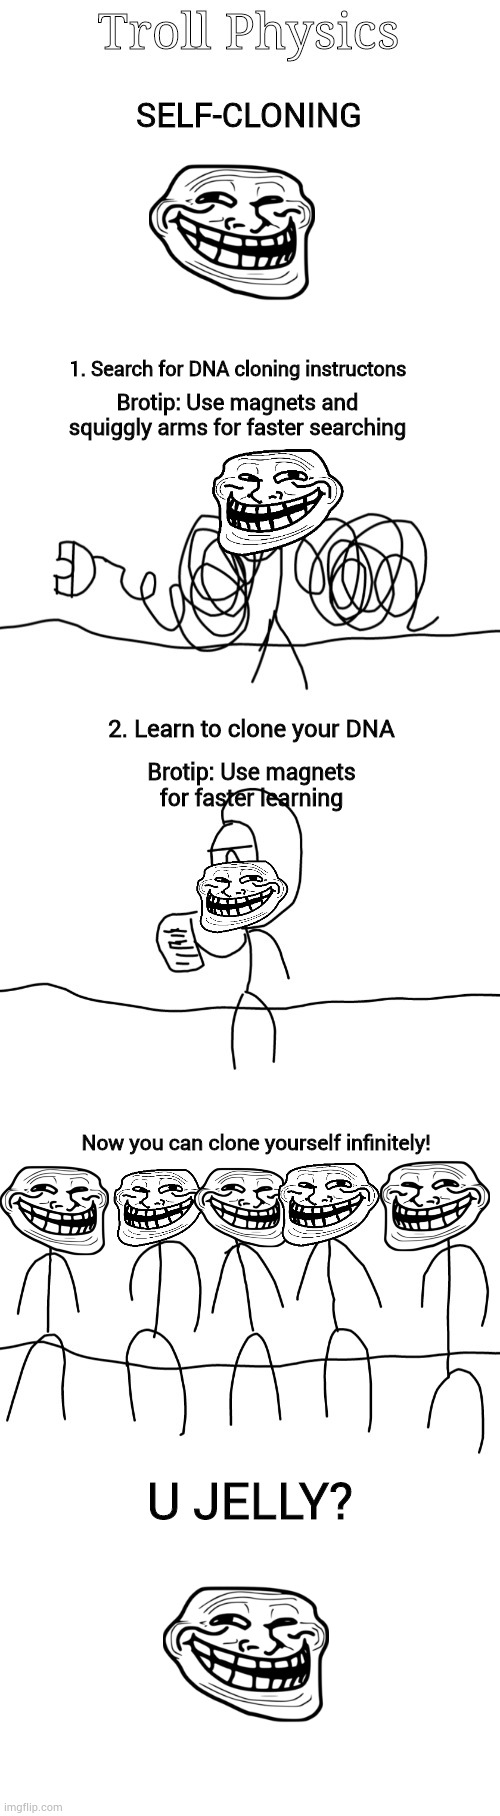 1. Search for DNA cloning instructons; Brotip: Use magnets and squiggly arms for faster searching; 2. Learn to clone your DNA; Brotip: Use magnets for faster learning; Now you can clone yourself infinitely! U JELLY? | made w/ Imgflip meme maker